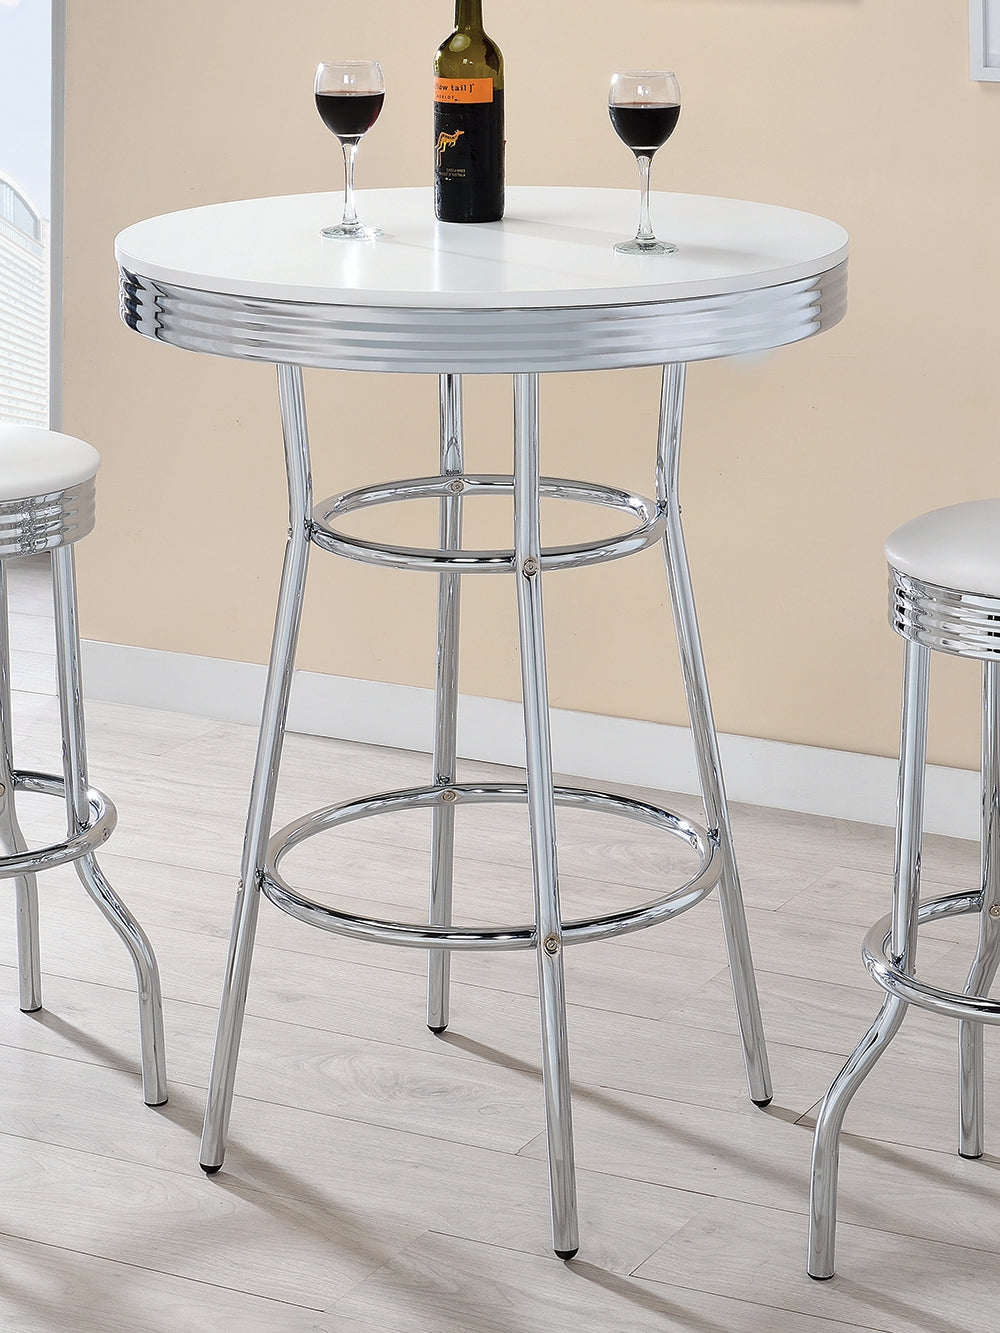 Martin's Retro Bar Table with High Gloss White Top